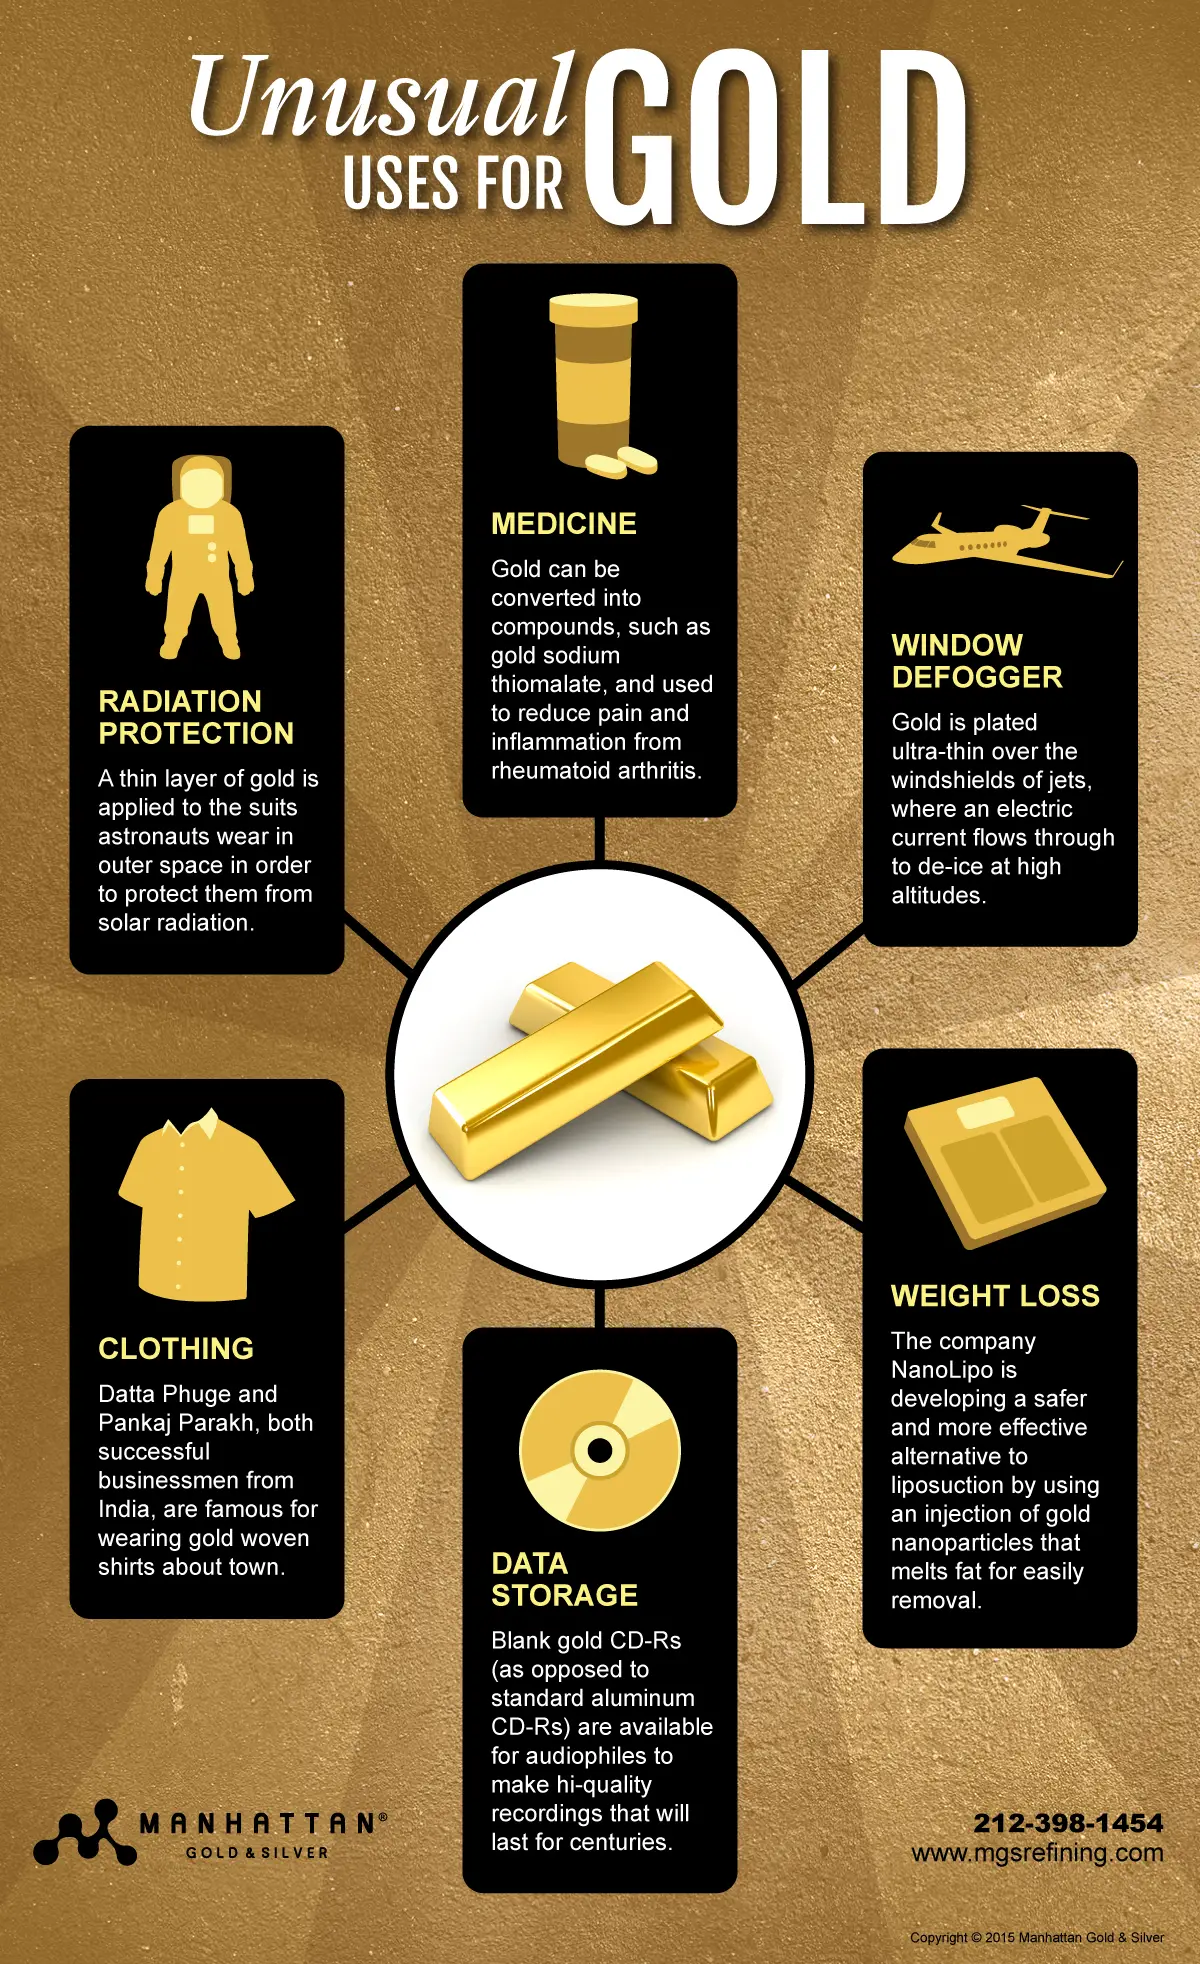 6 Unusual Uses for Gold